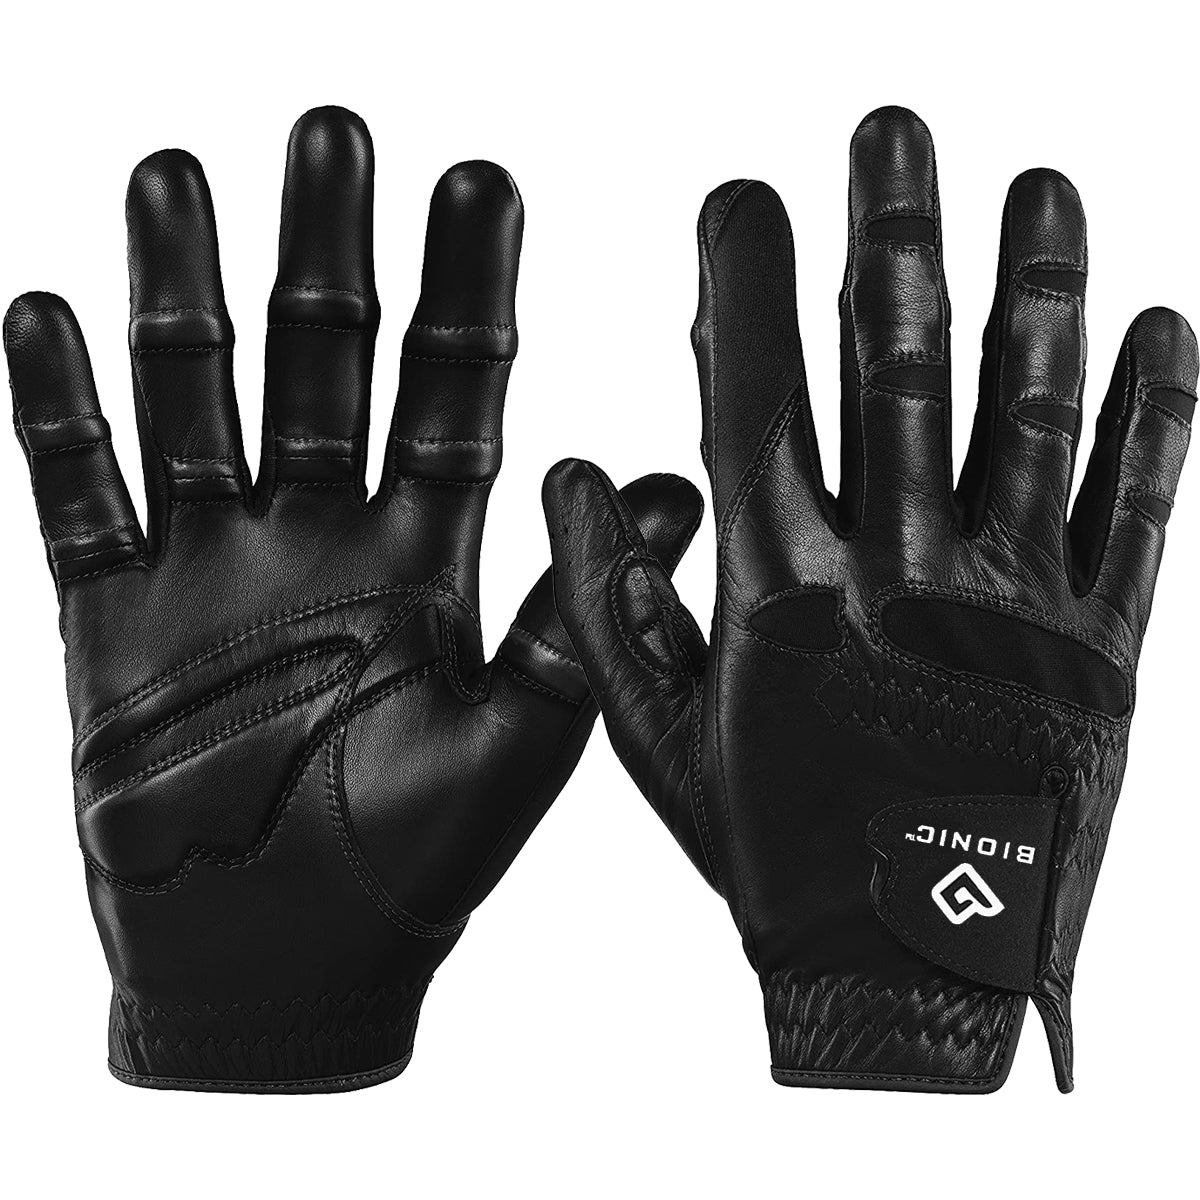 Bionic Men's Right Hand Stable Grip 2.0 Dual Expansion Zone Golf Glove - Black Bionic